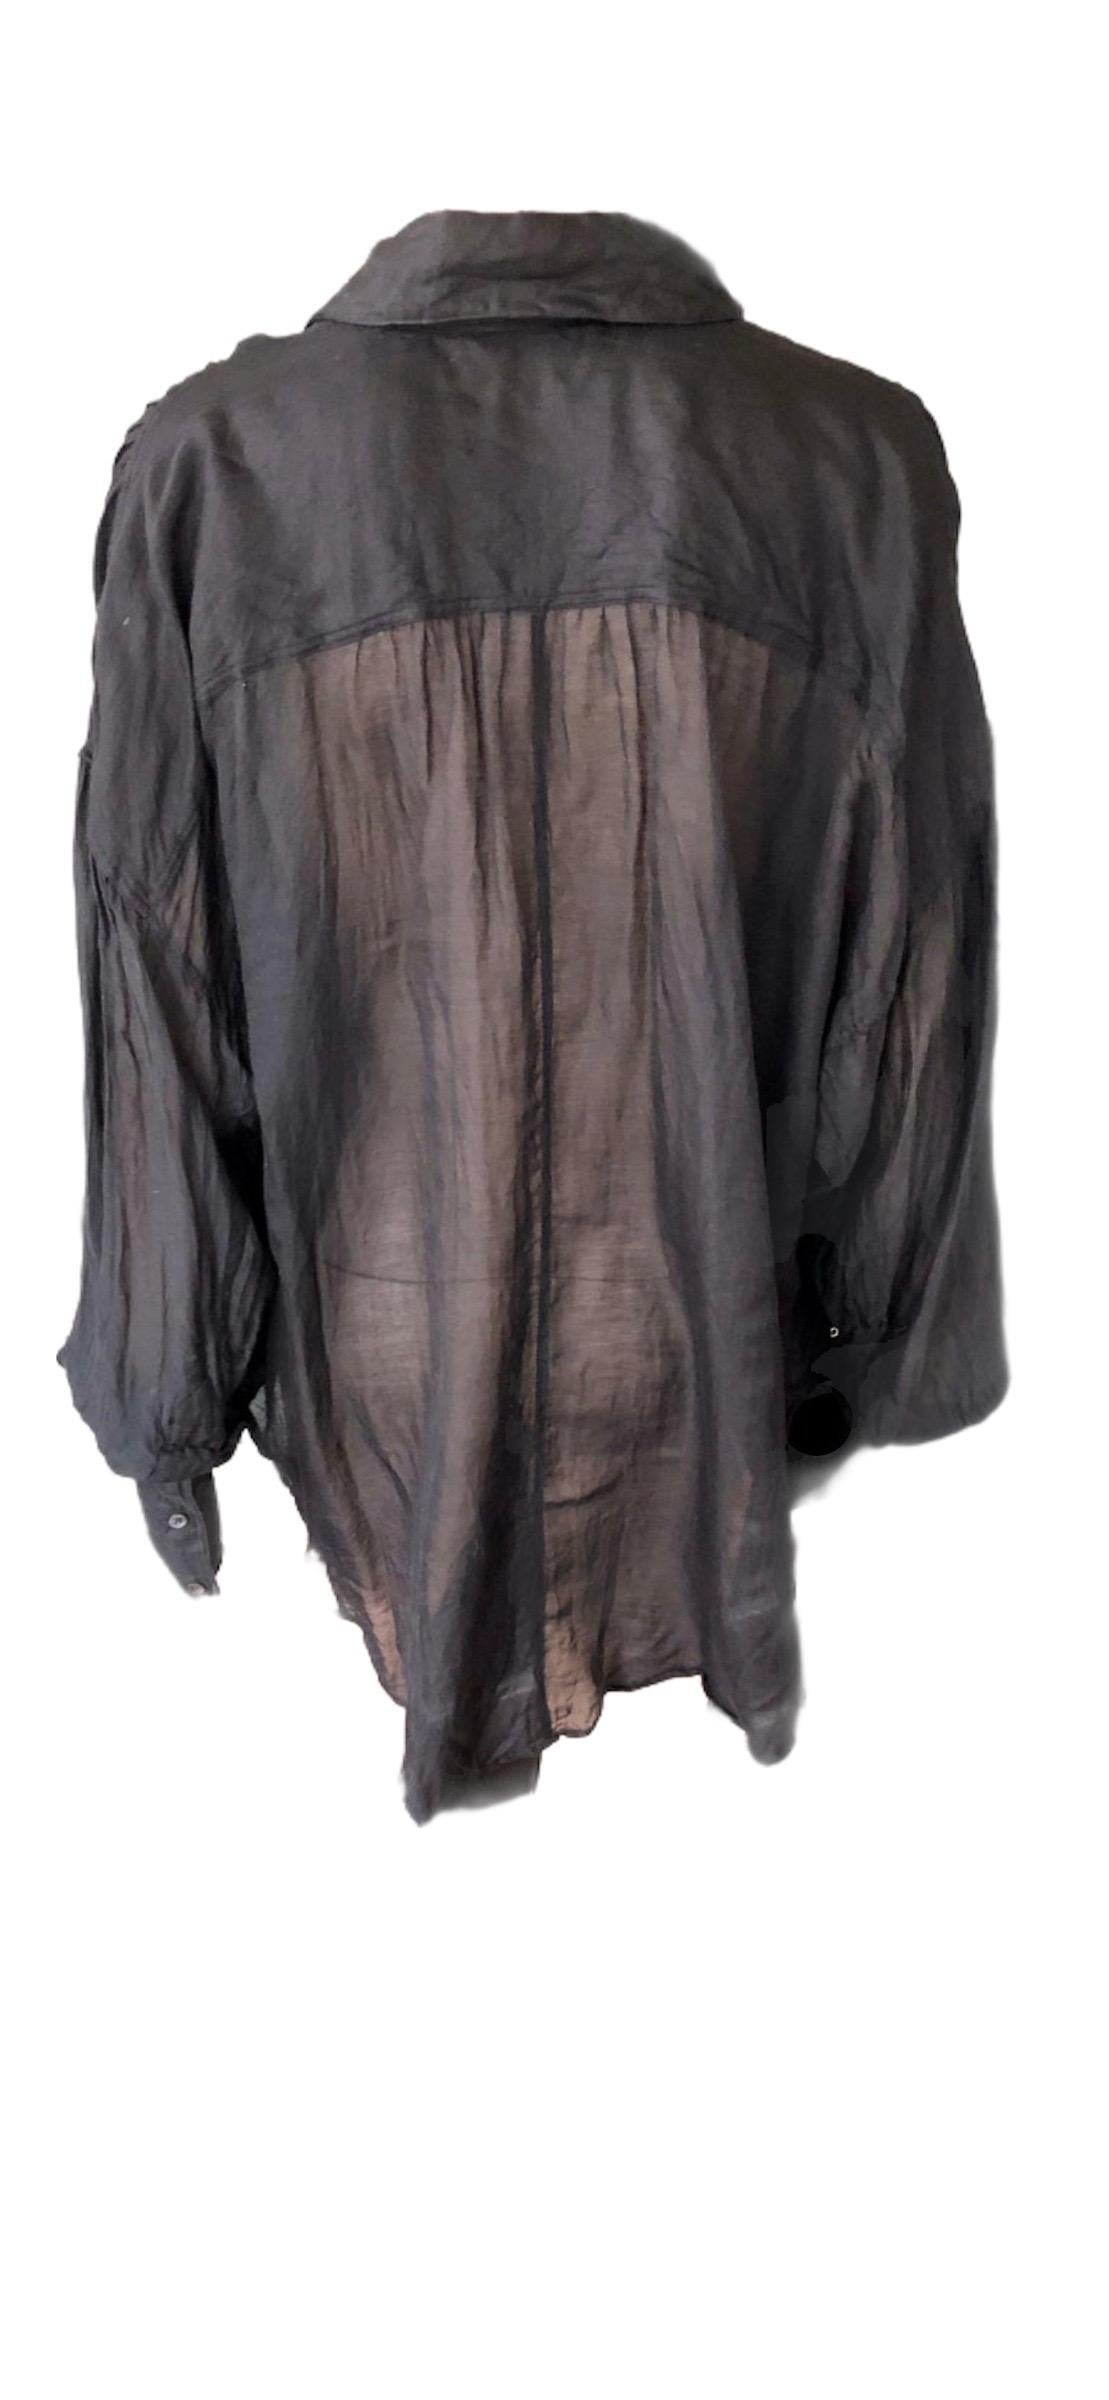 Tom Ford for Gucci F/W 2002 Sheer Plunging Lace-Up Black Tunic Shirt Blouse Top 1